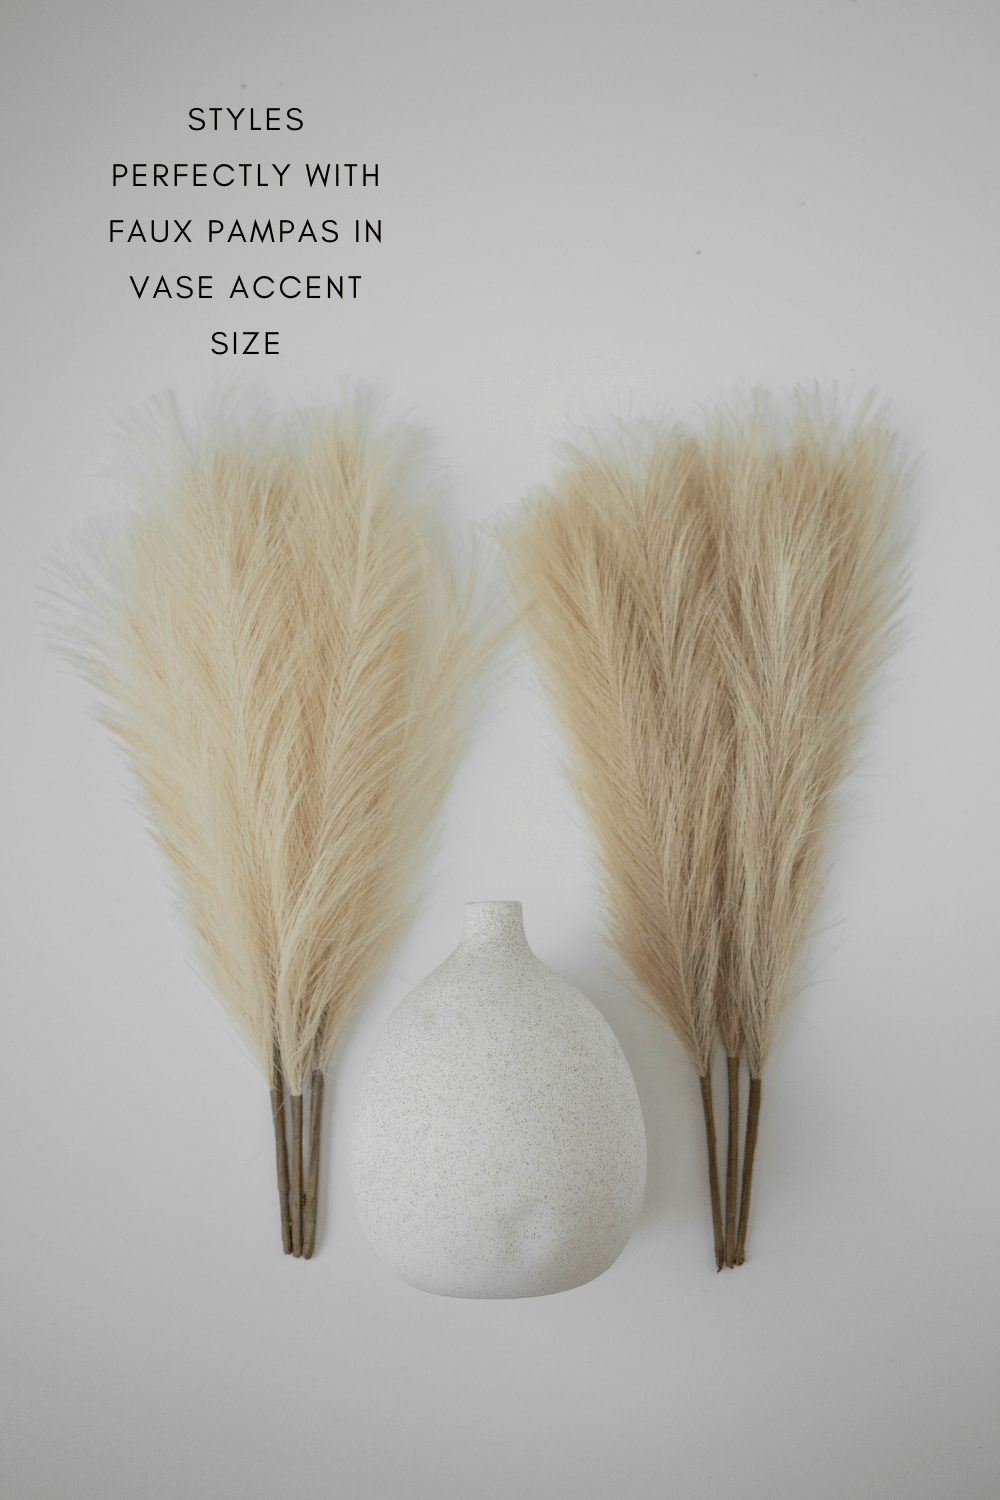 Luxe B "Faux" Accent Artificial Pampas Grass in Cream + Mojave Vase Promo Pack - Luxe B Pampas Grass  Canada , ships via Canada Post from Edmonton 